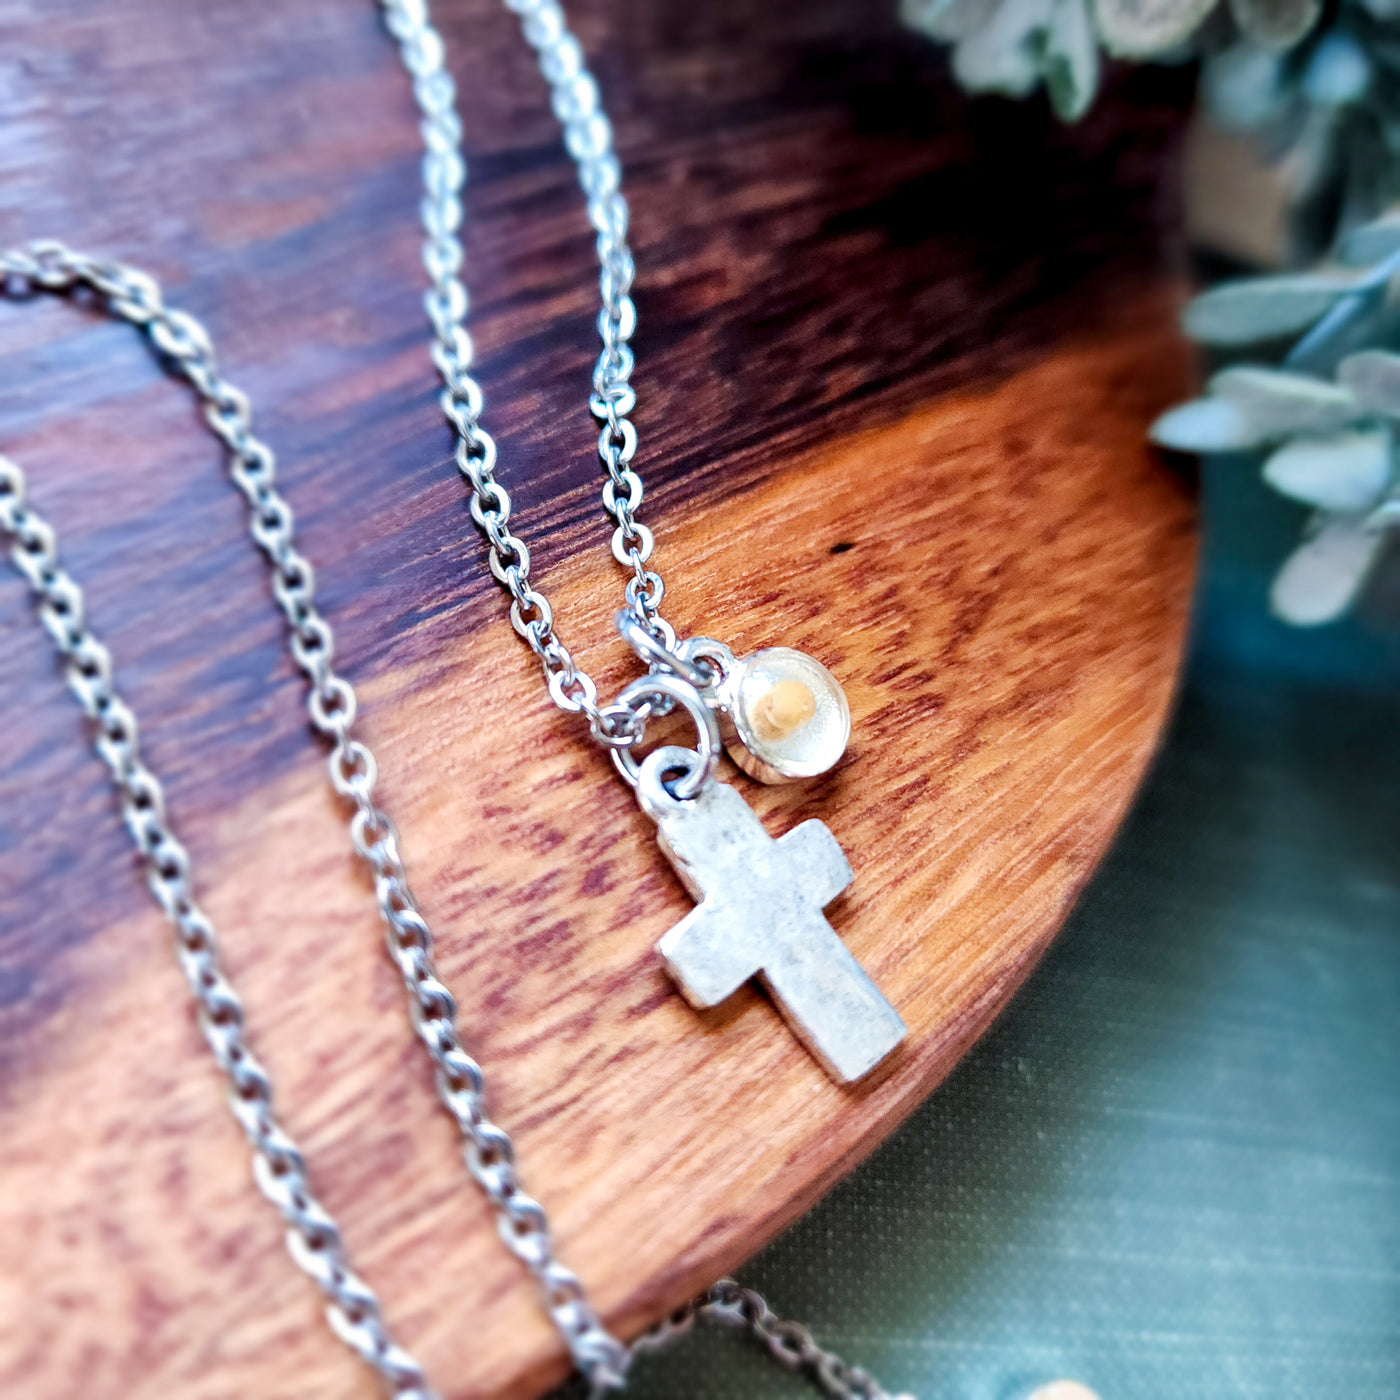 Cross + Mustard Seed | Necklaces